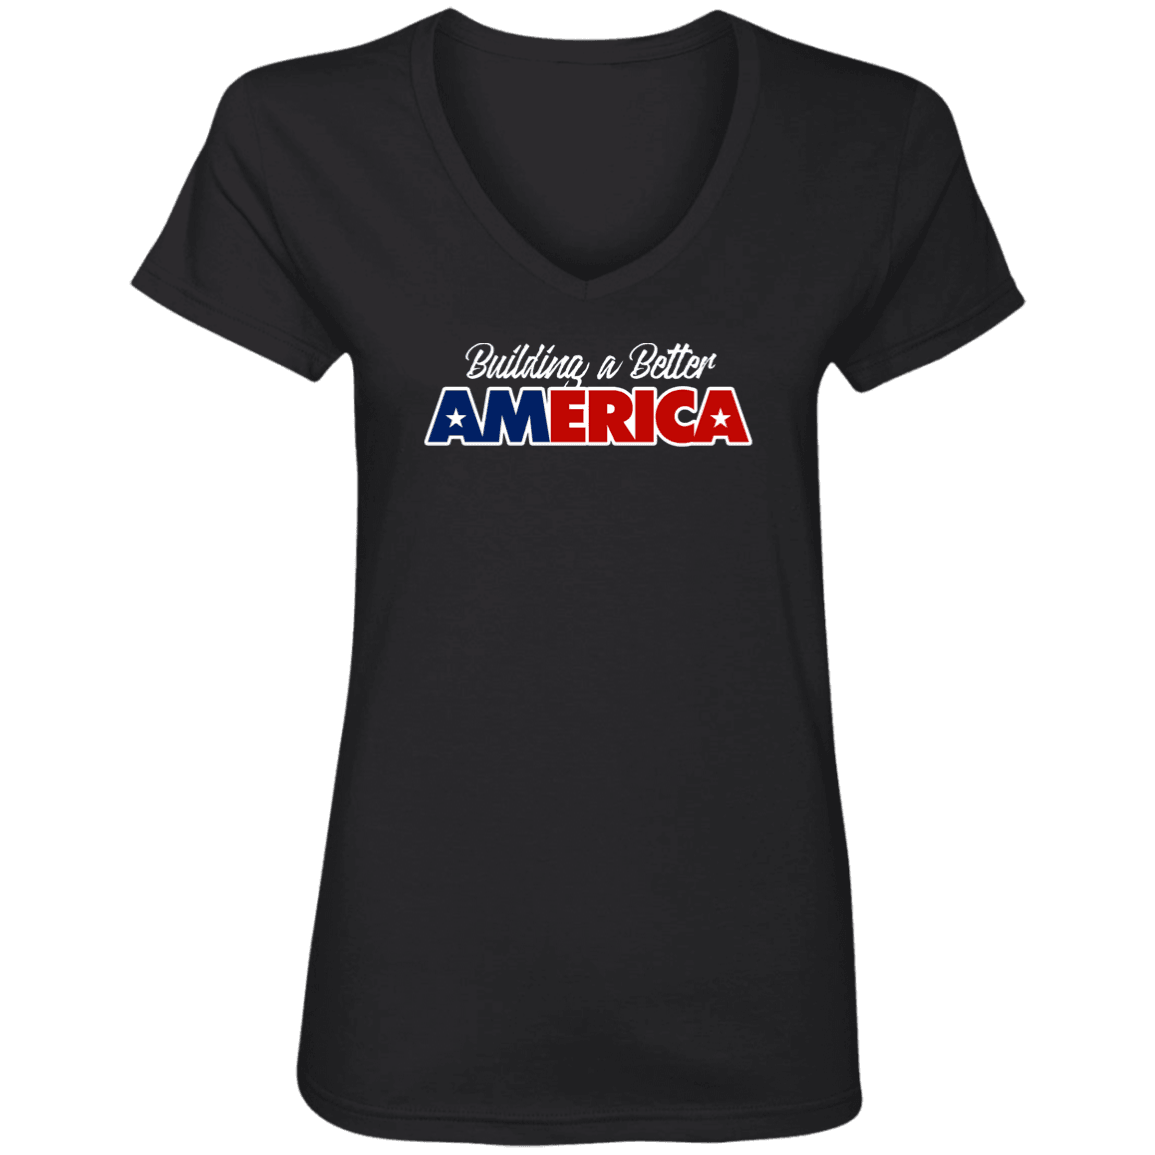 Designs by MyUtopia Shout Out:Building A Better America Ladies' V-Neck T-Shirt,Black / S,Ladies T-Shirts